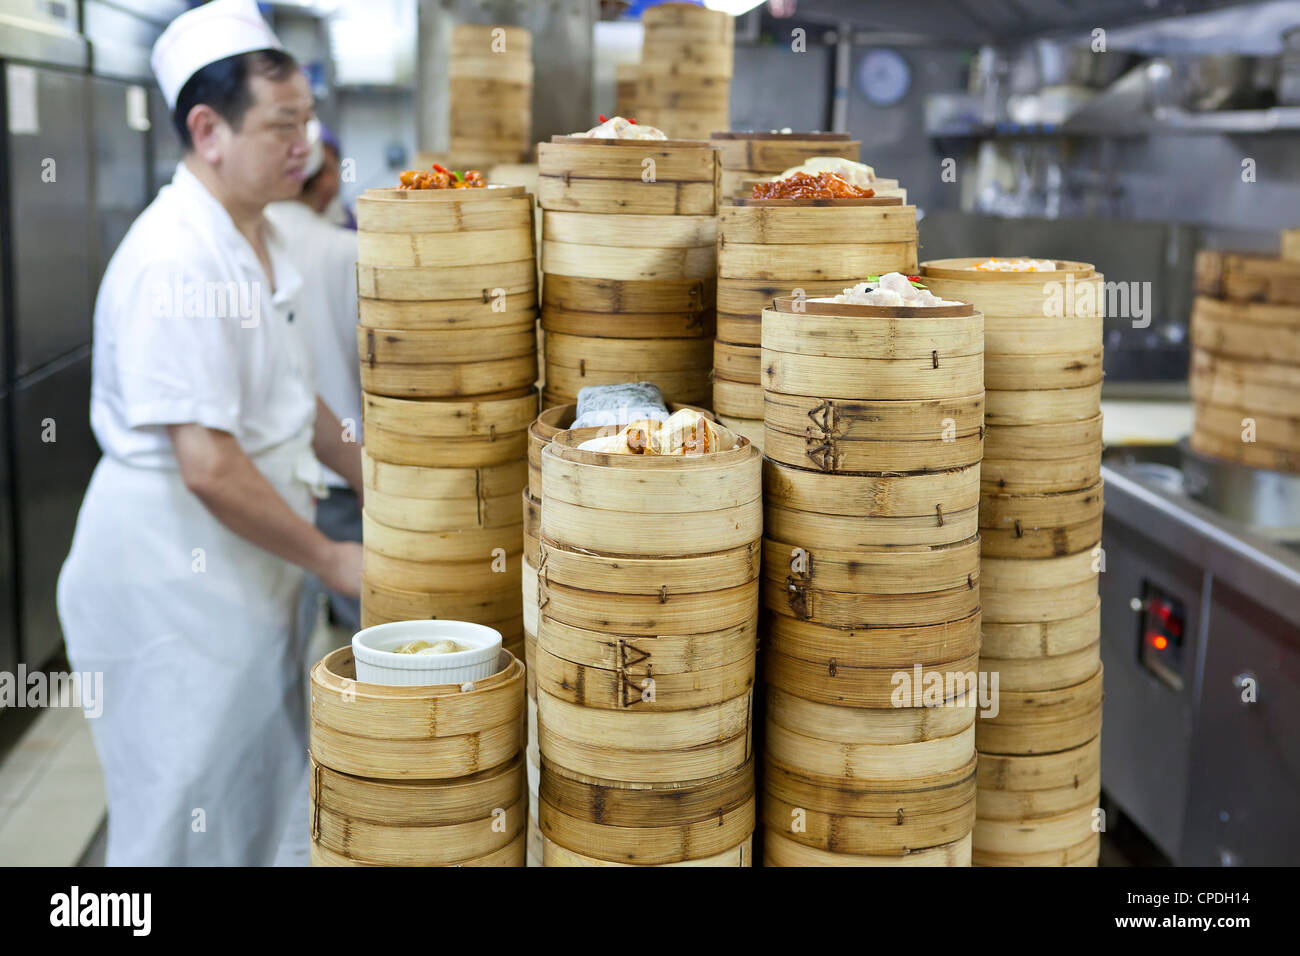 Dim Sum Preparation In A Restaurant Kitchen In Hong Kong China Asia CPDH14 